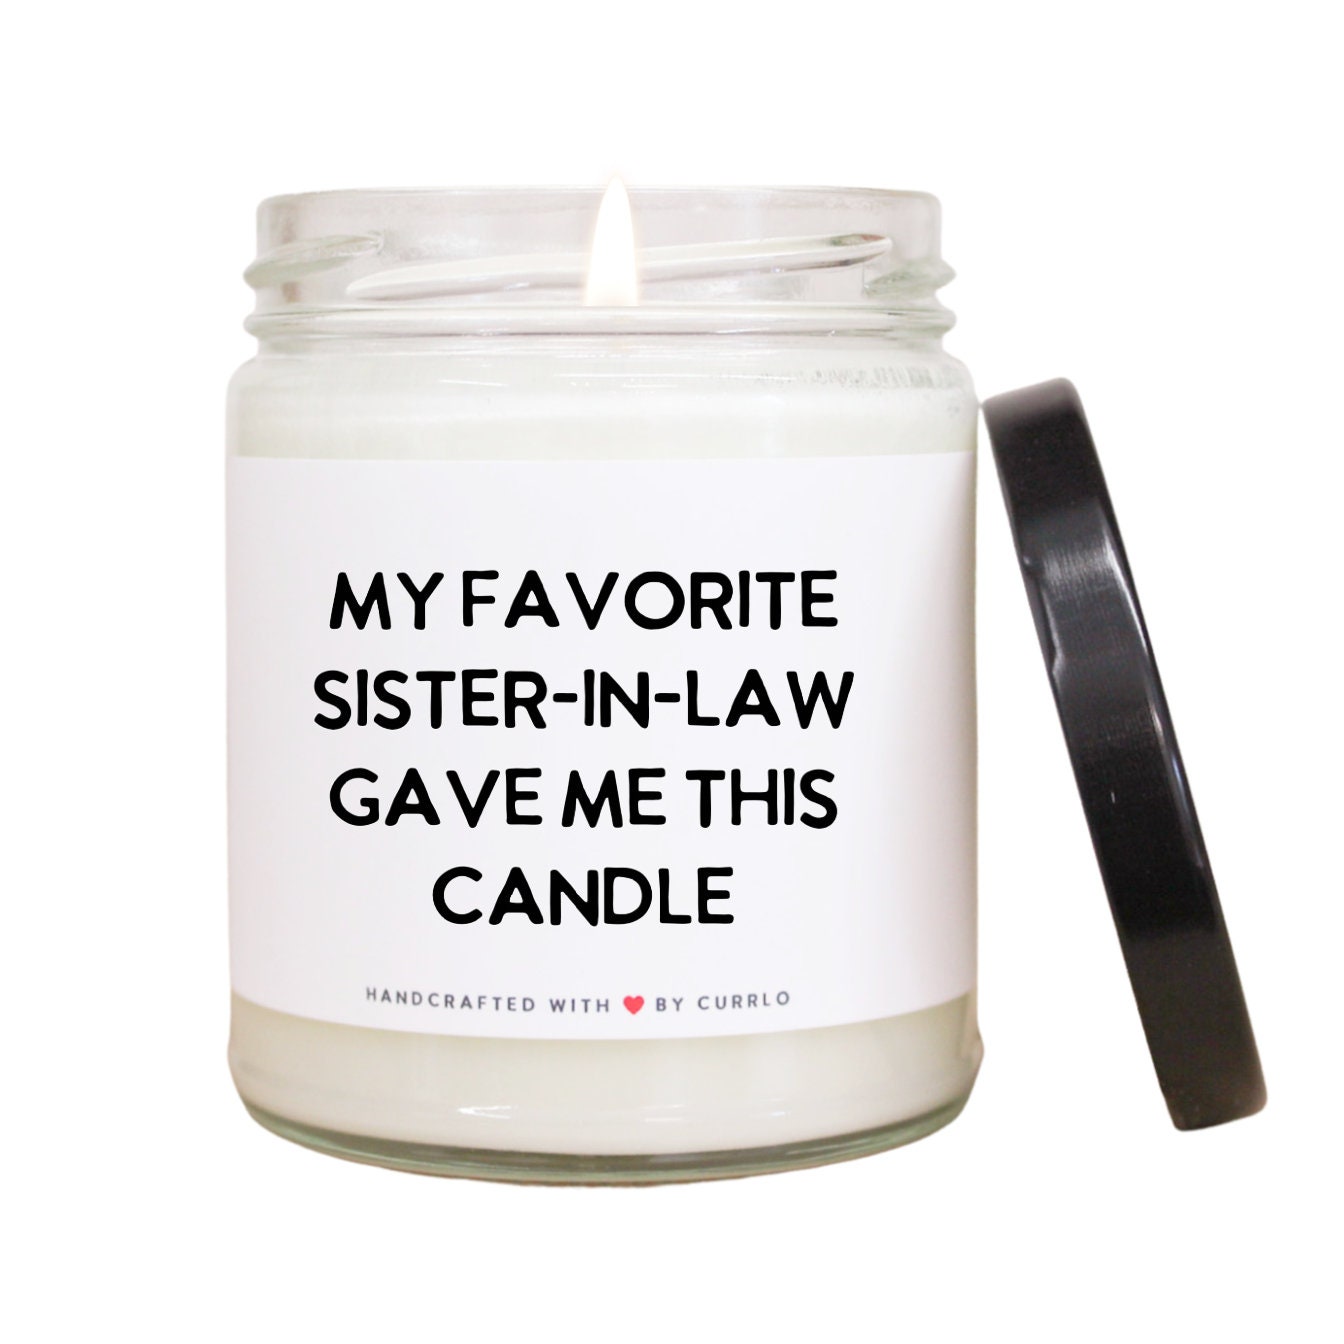 Discover Sister in Law Candle - Christmas Gift for Sister in Law - Gift from Sister in Law - Future Sister in Law Gifts - Wedding Day Gifts Sister